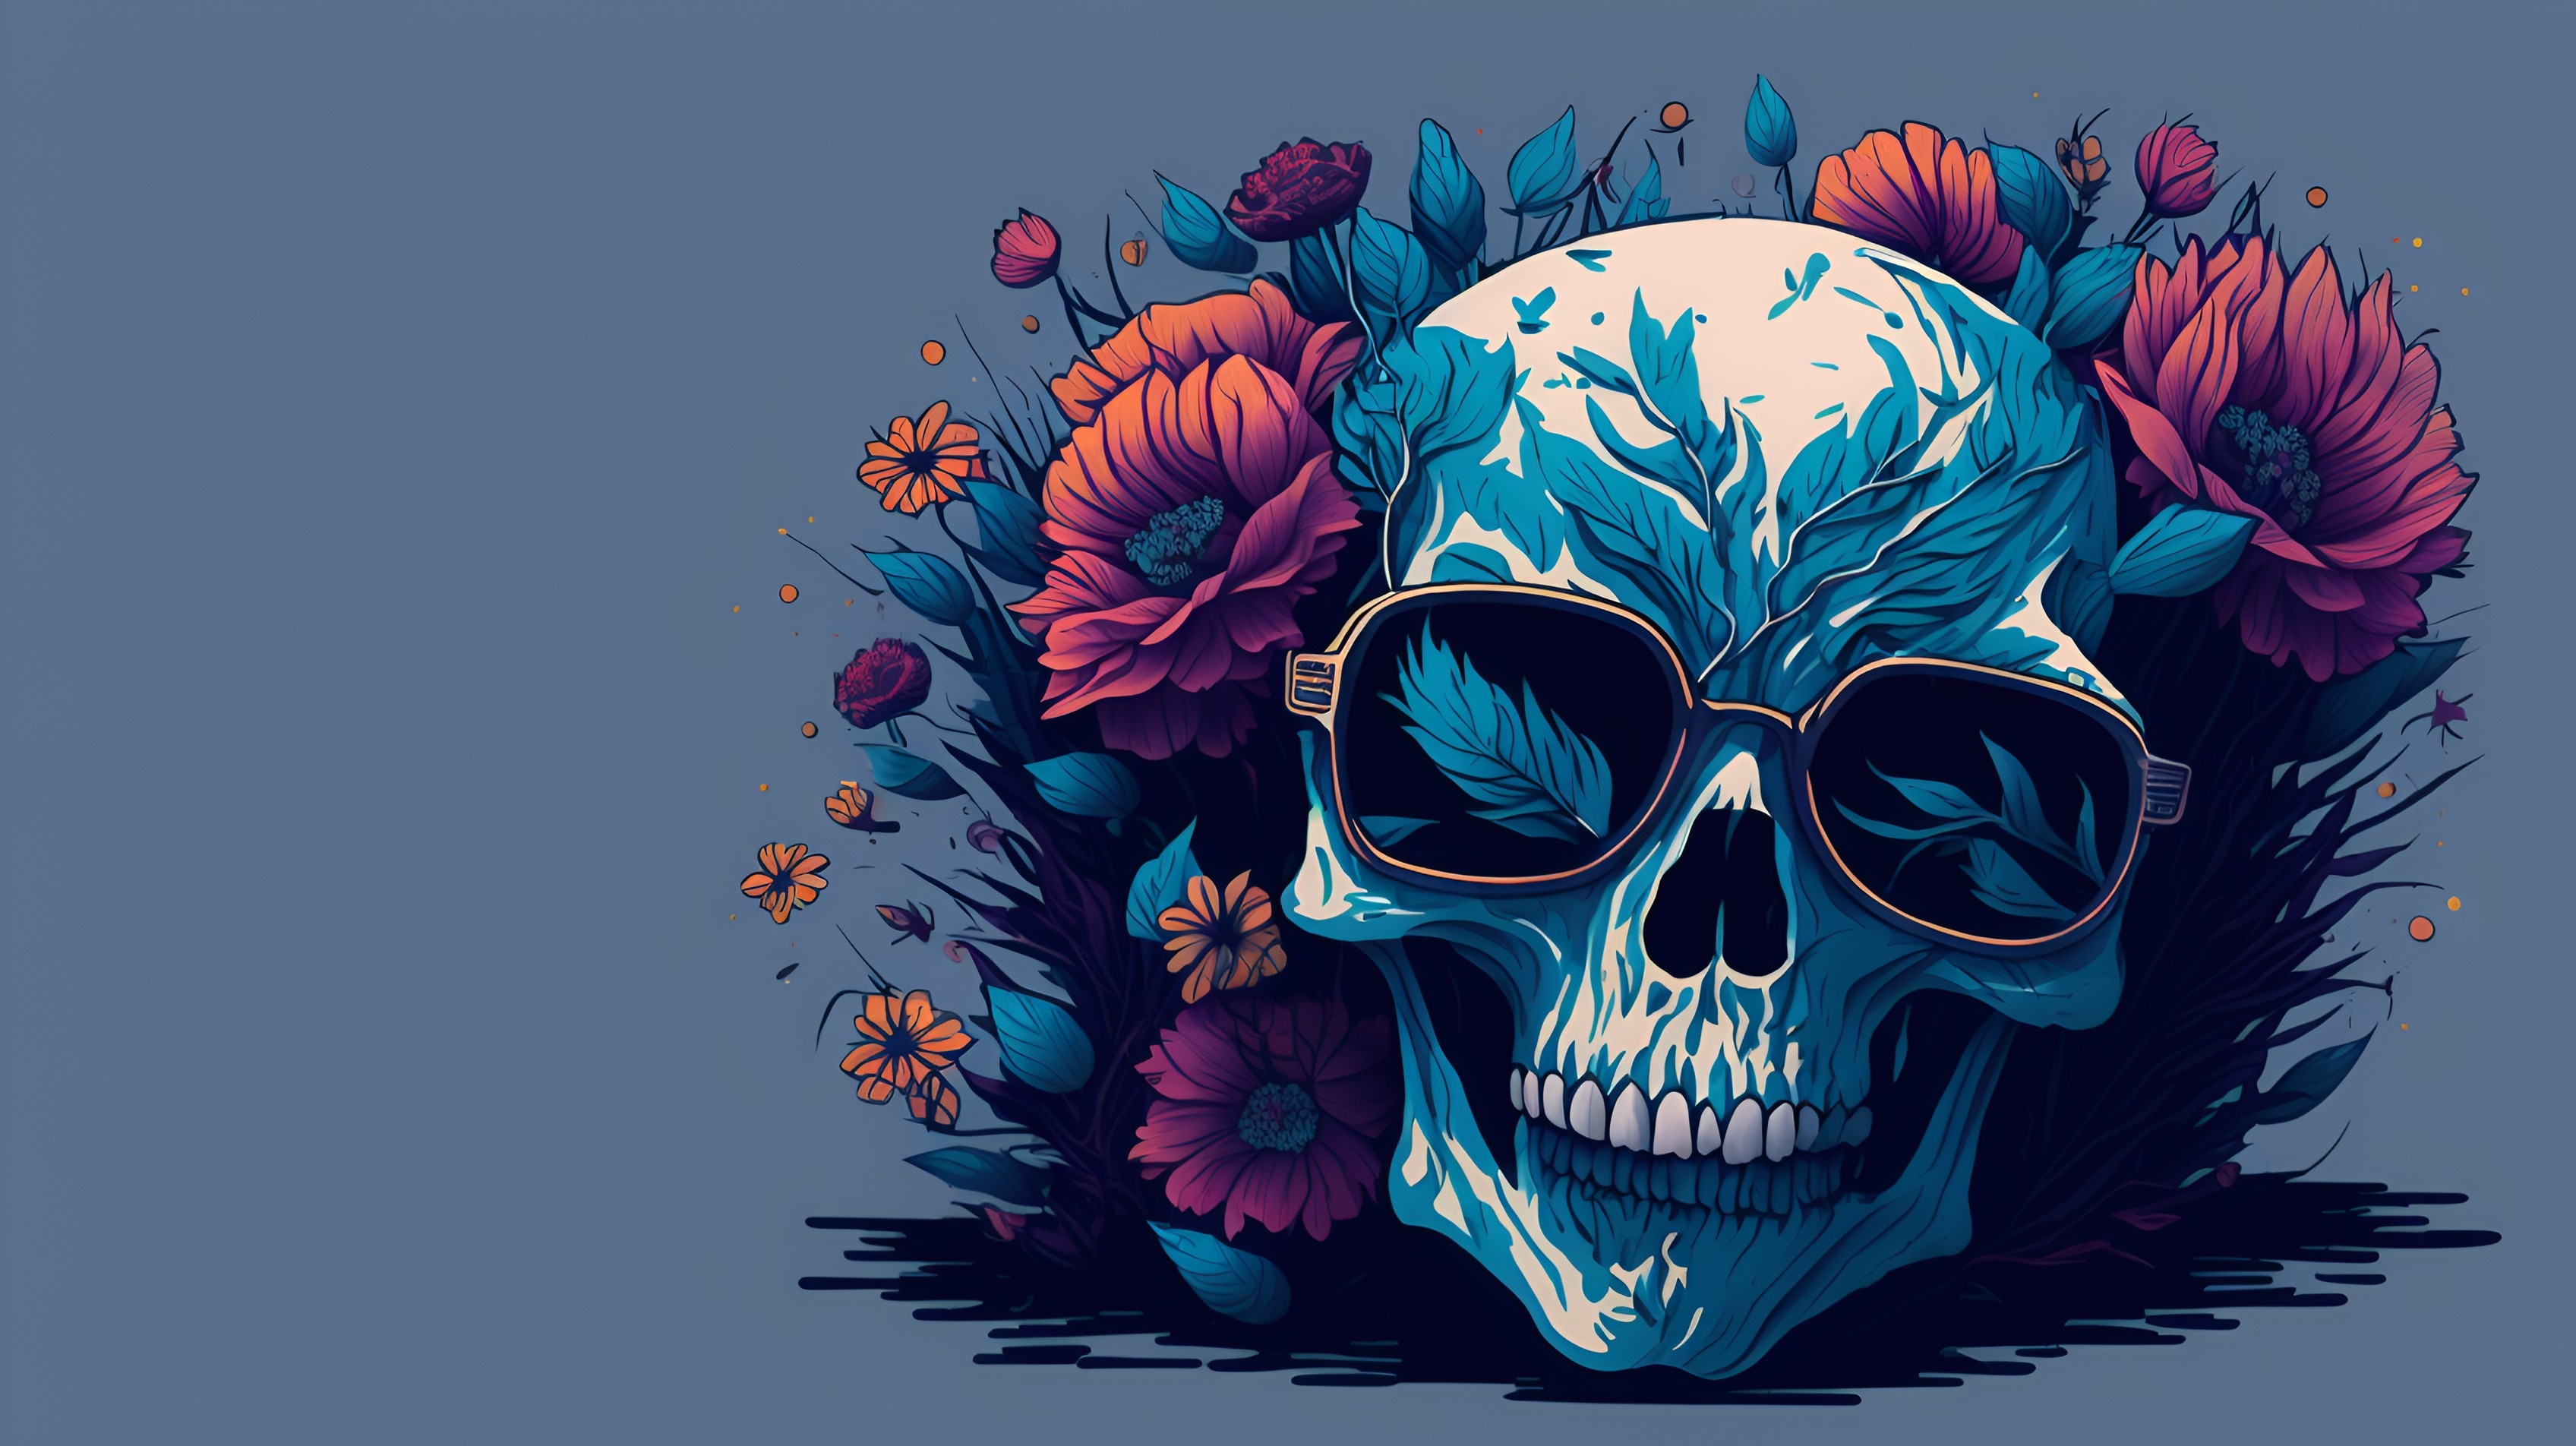 Floral Skull iPhone Wallpaper HD  iPhone Wallpapers  iPhone Wallpapers